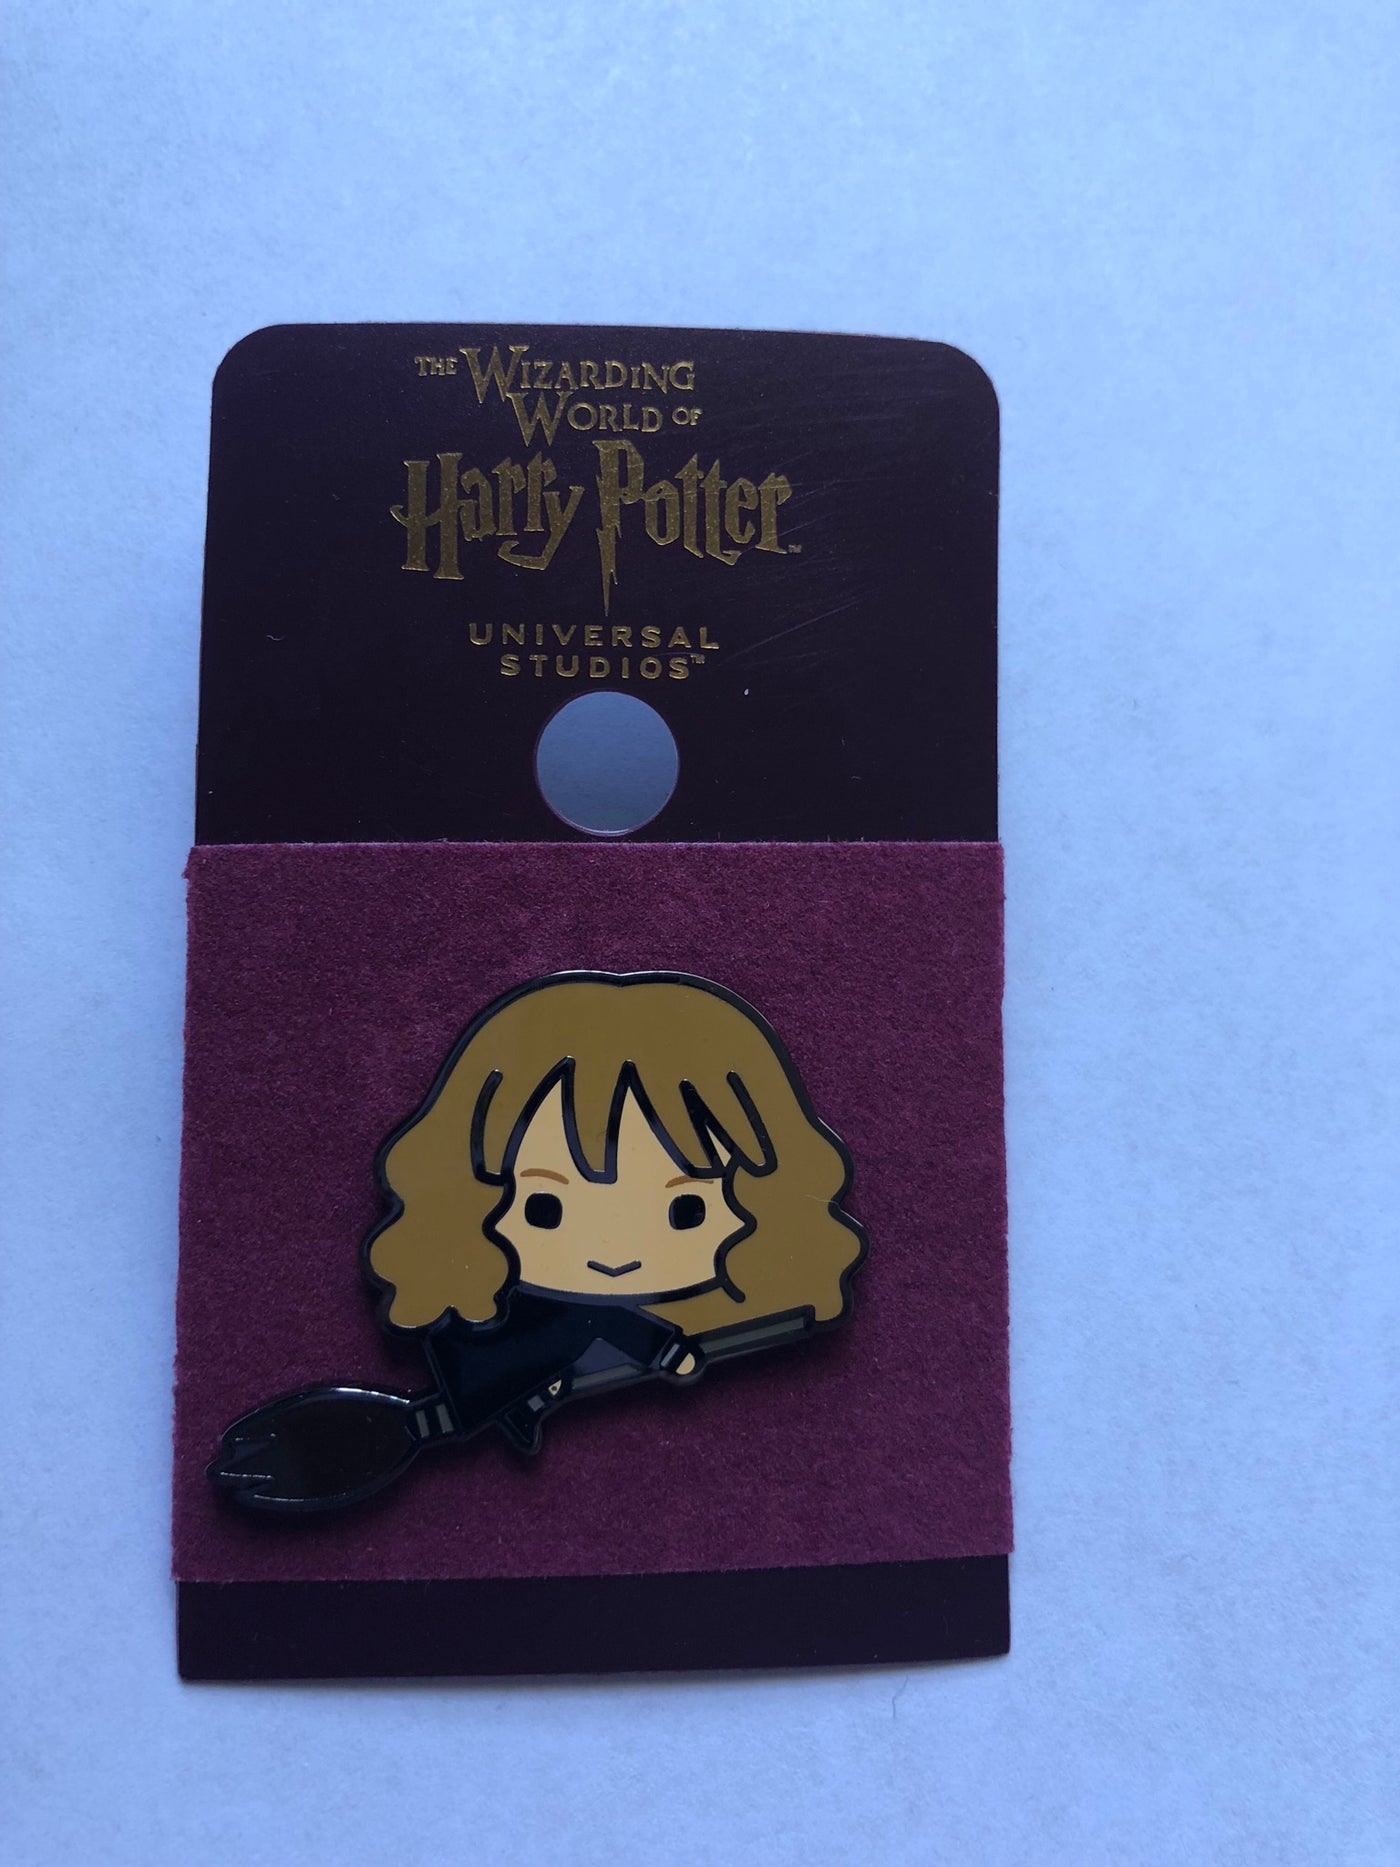 Universal Studios Wizarding World Harry Potter Hermione with Broom Pin New Card